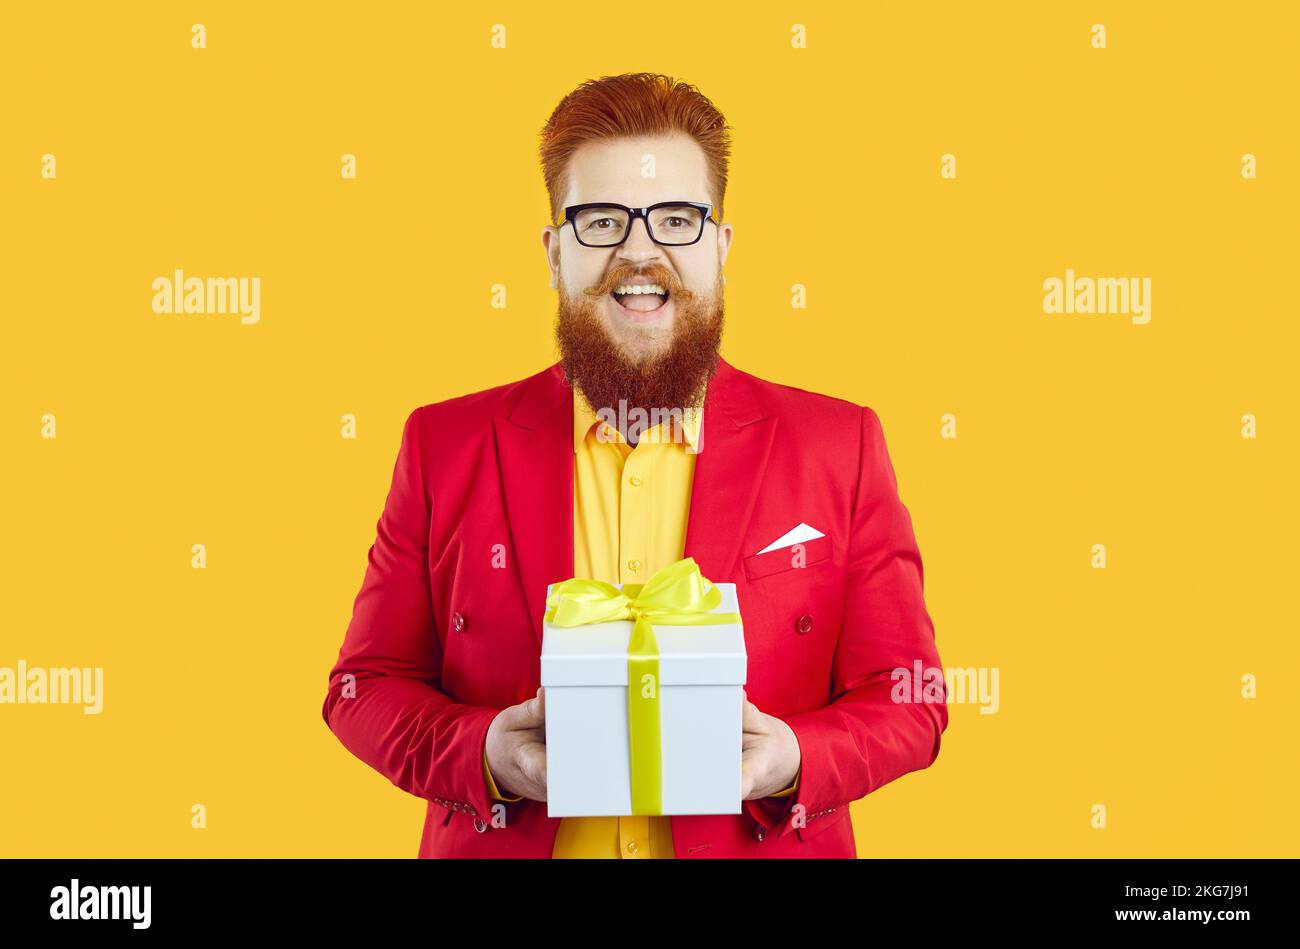 Extravagant stylish chubby man presents you with gift standing on orange background. Stock Photo